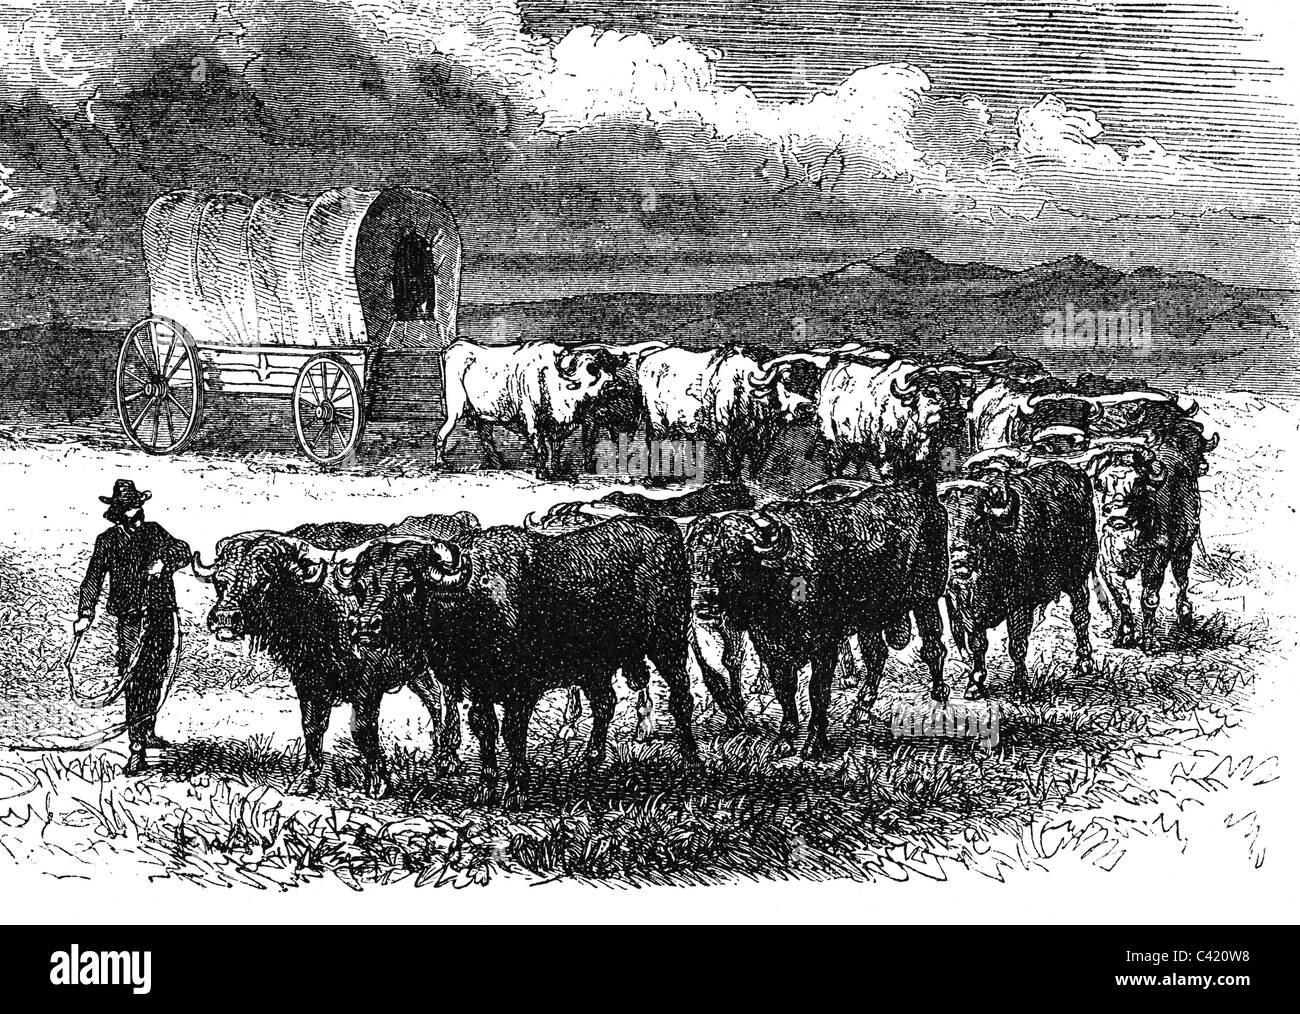 geography / travel, USA, settlers, covered wagon with a team of oxen, wood engraving, 2nd half 19th century, draught animals, pioneers, Wild West, frontier, North America, historic, historical, people, Additional-Rights-Clearences-Not Available Stock Photo